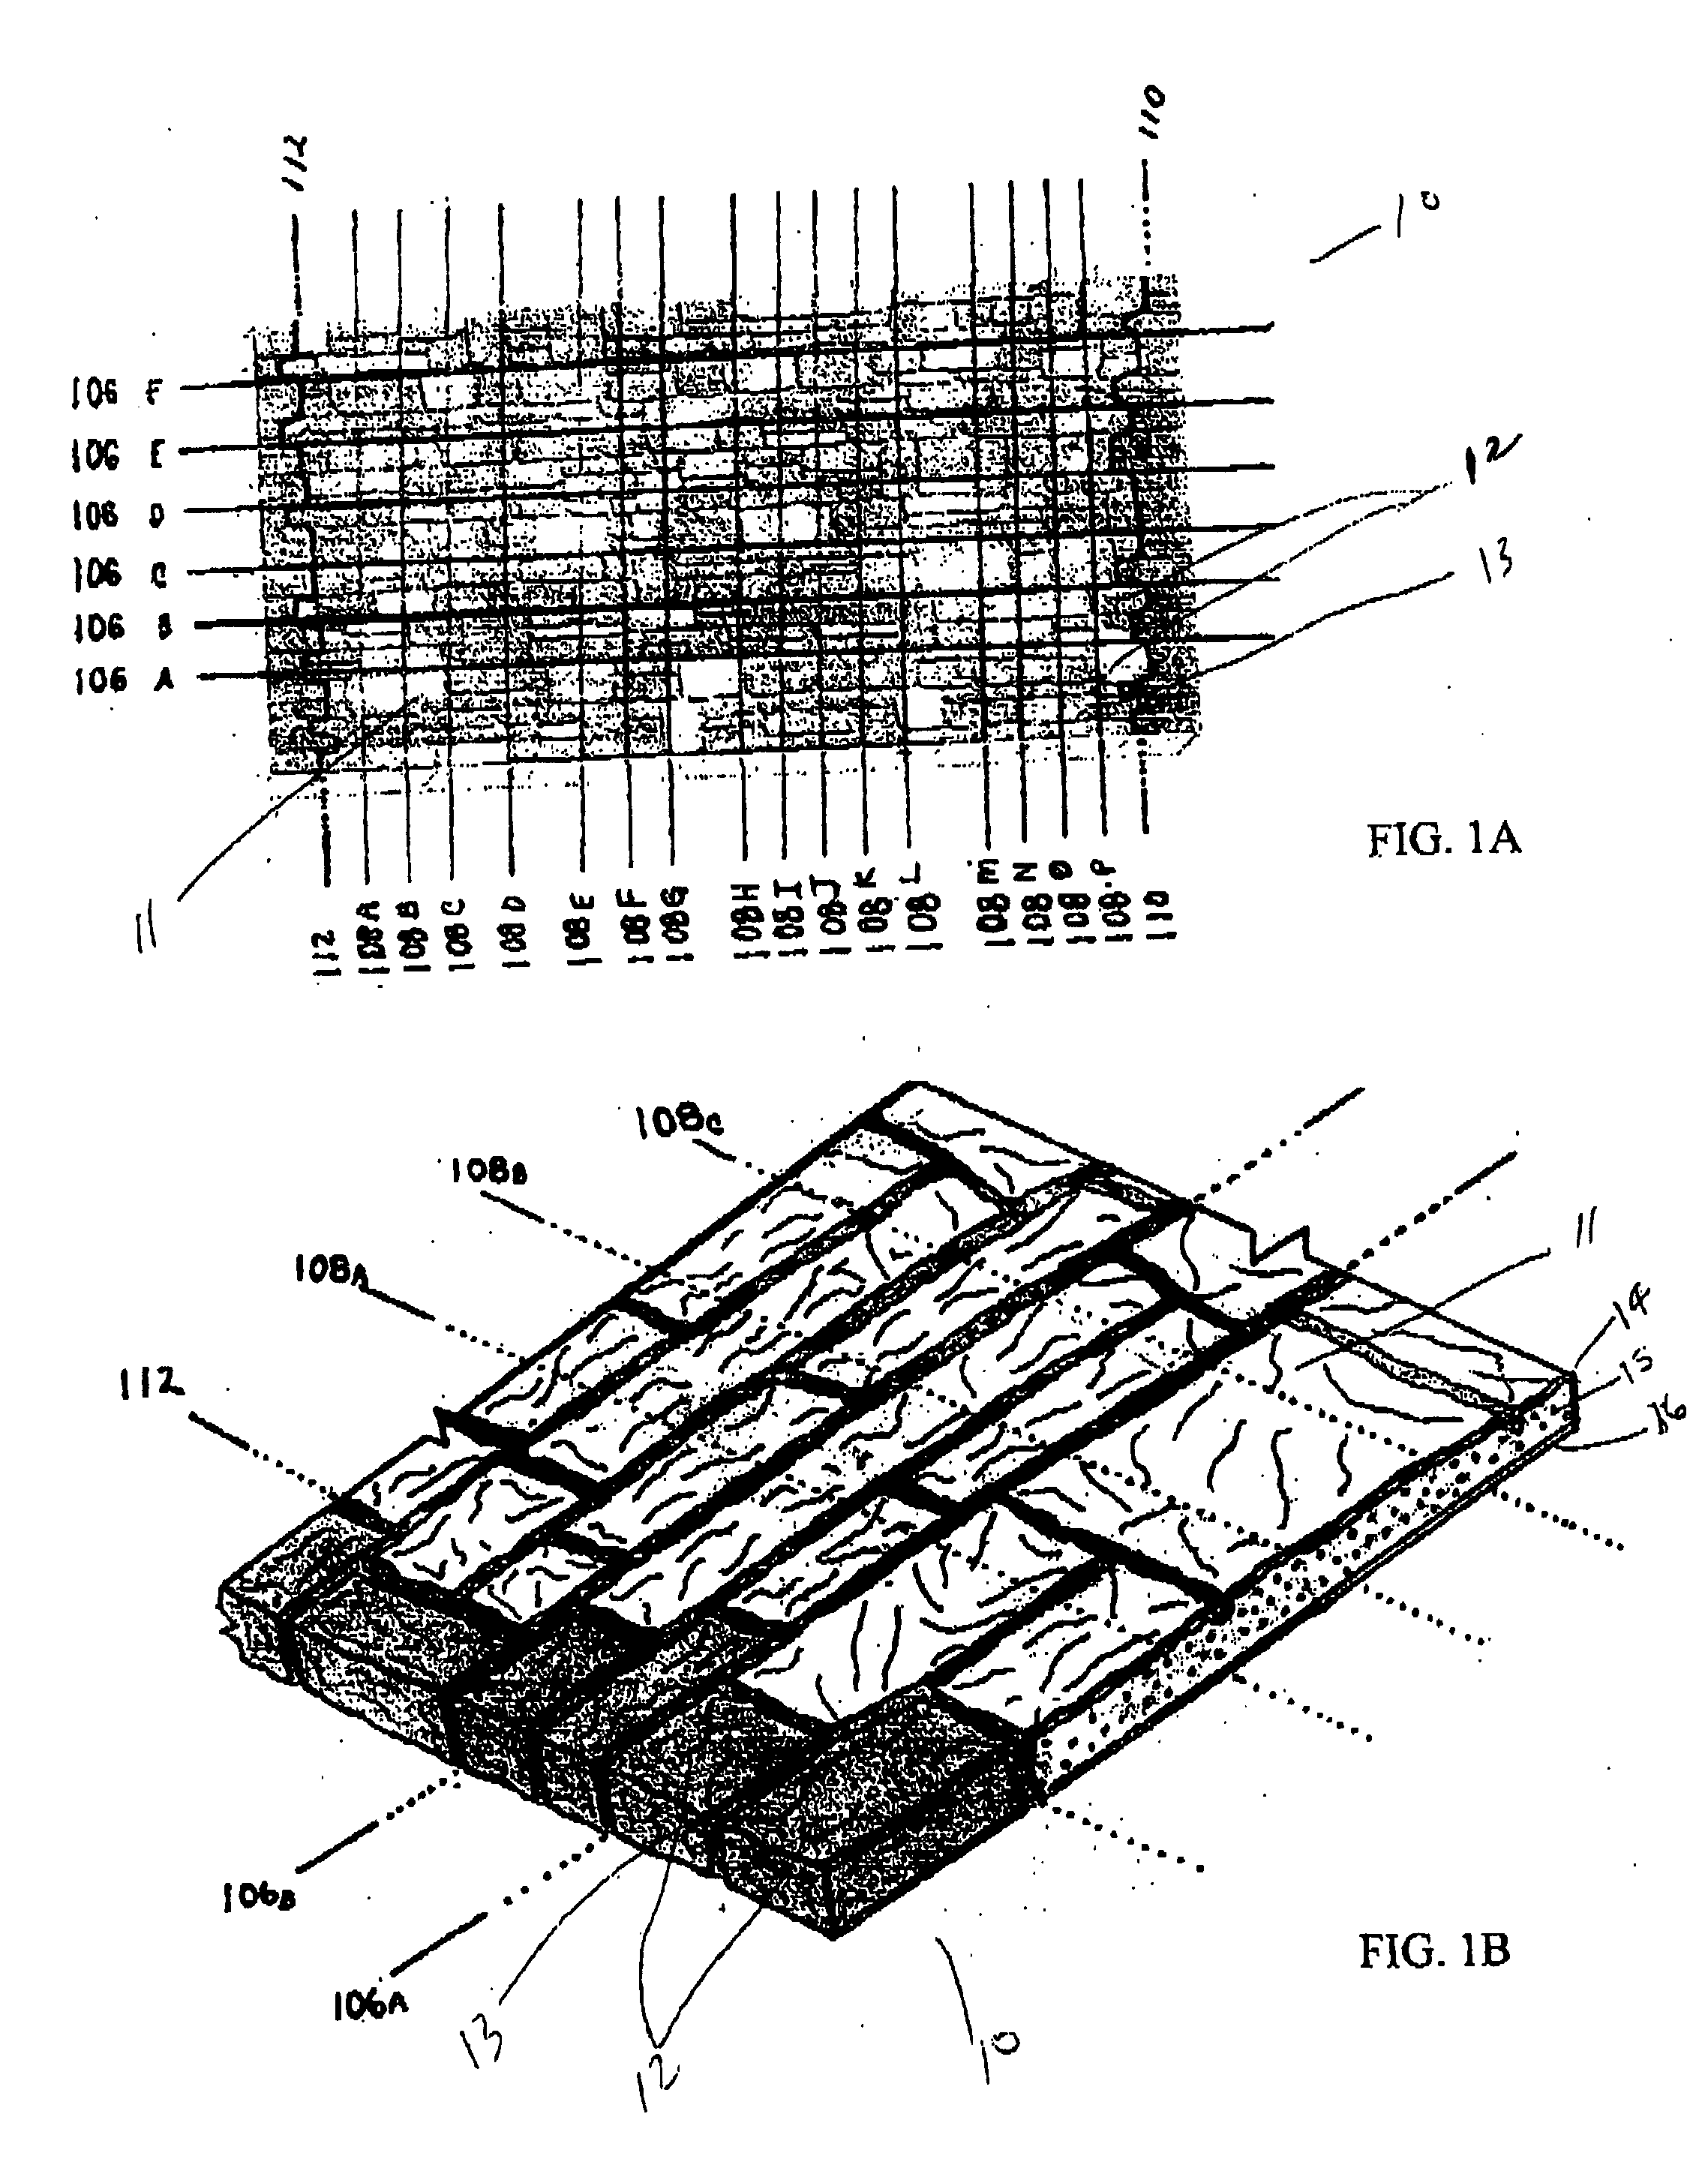 Method and apparatus for forming building panels and components which simulate man-made tiles and natural stones